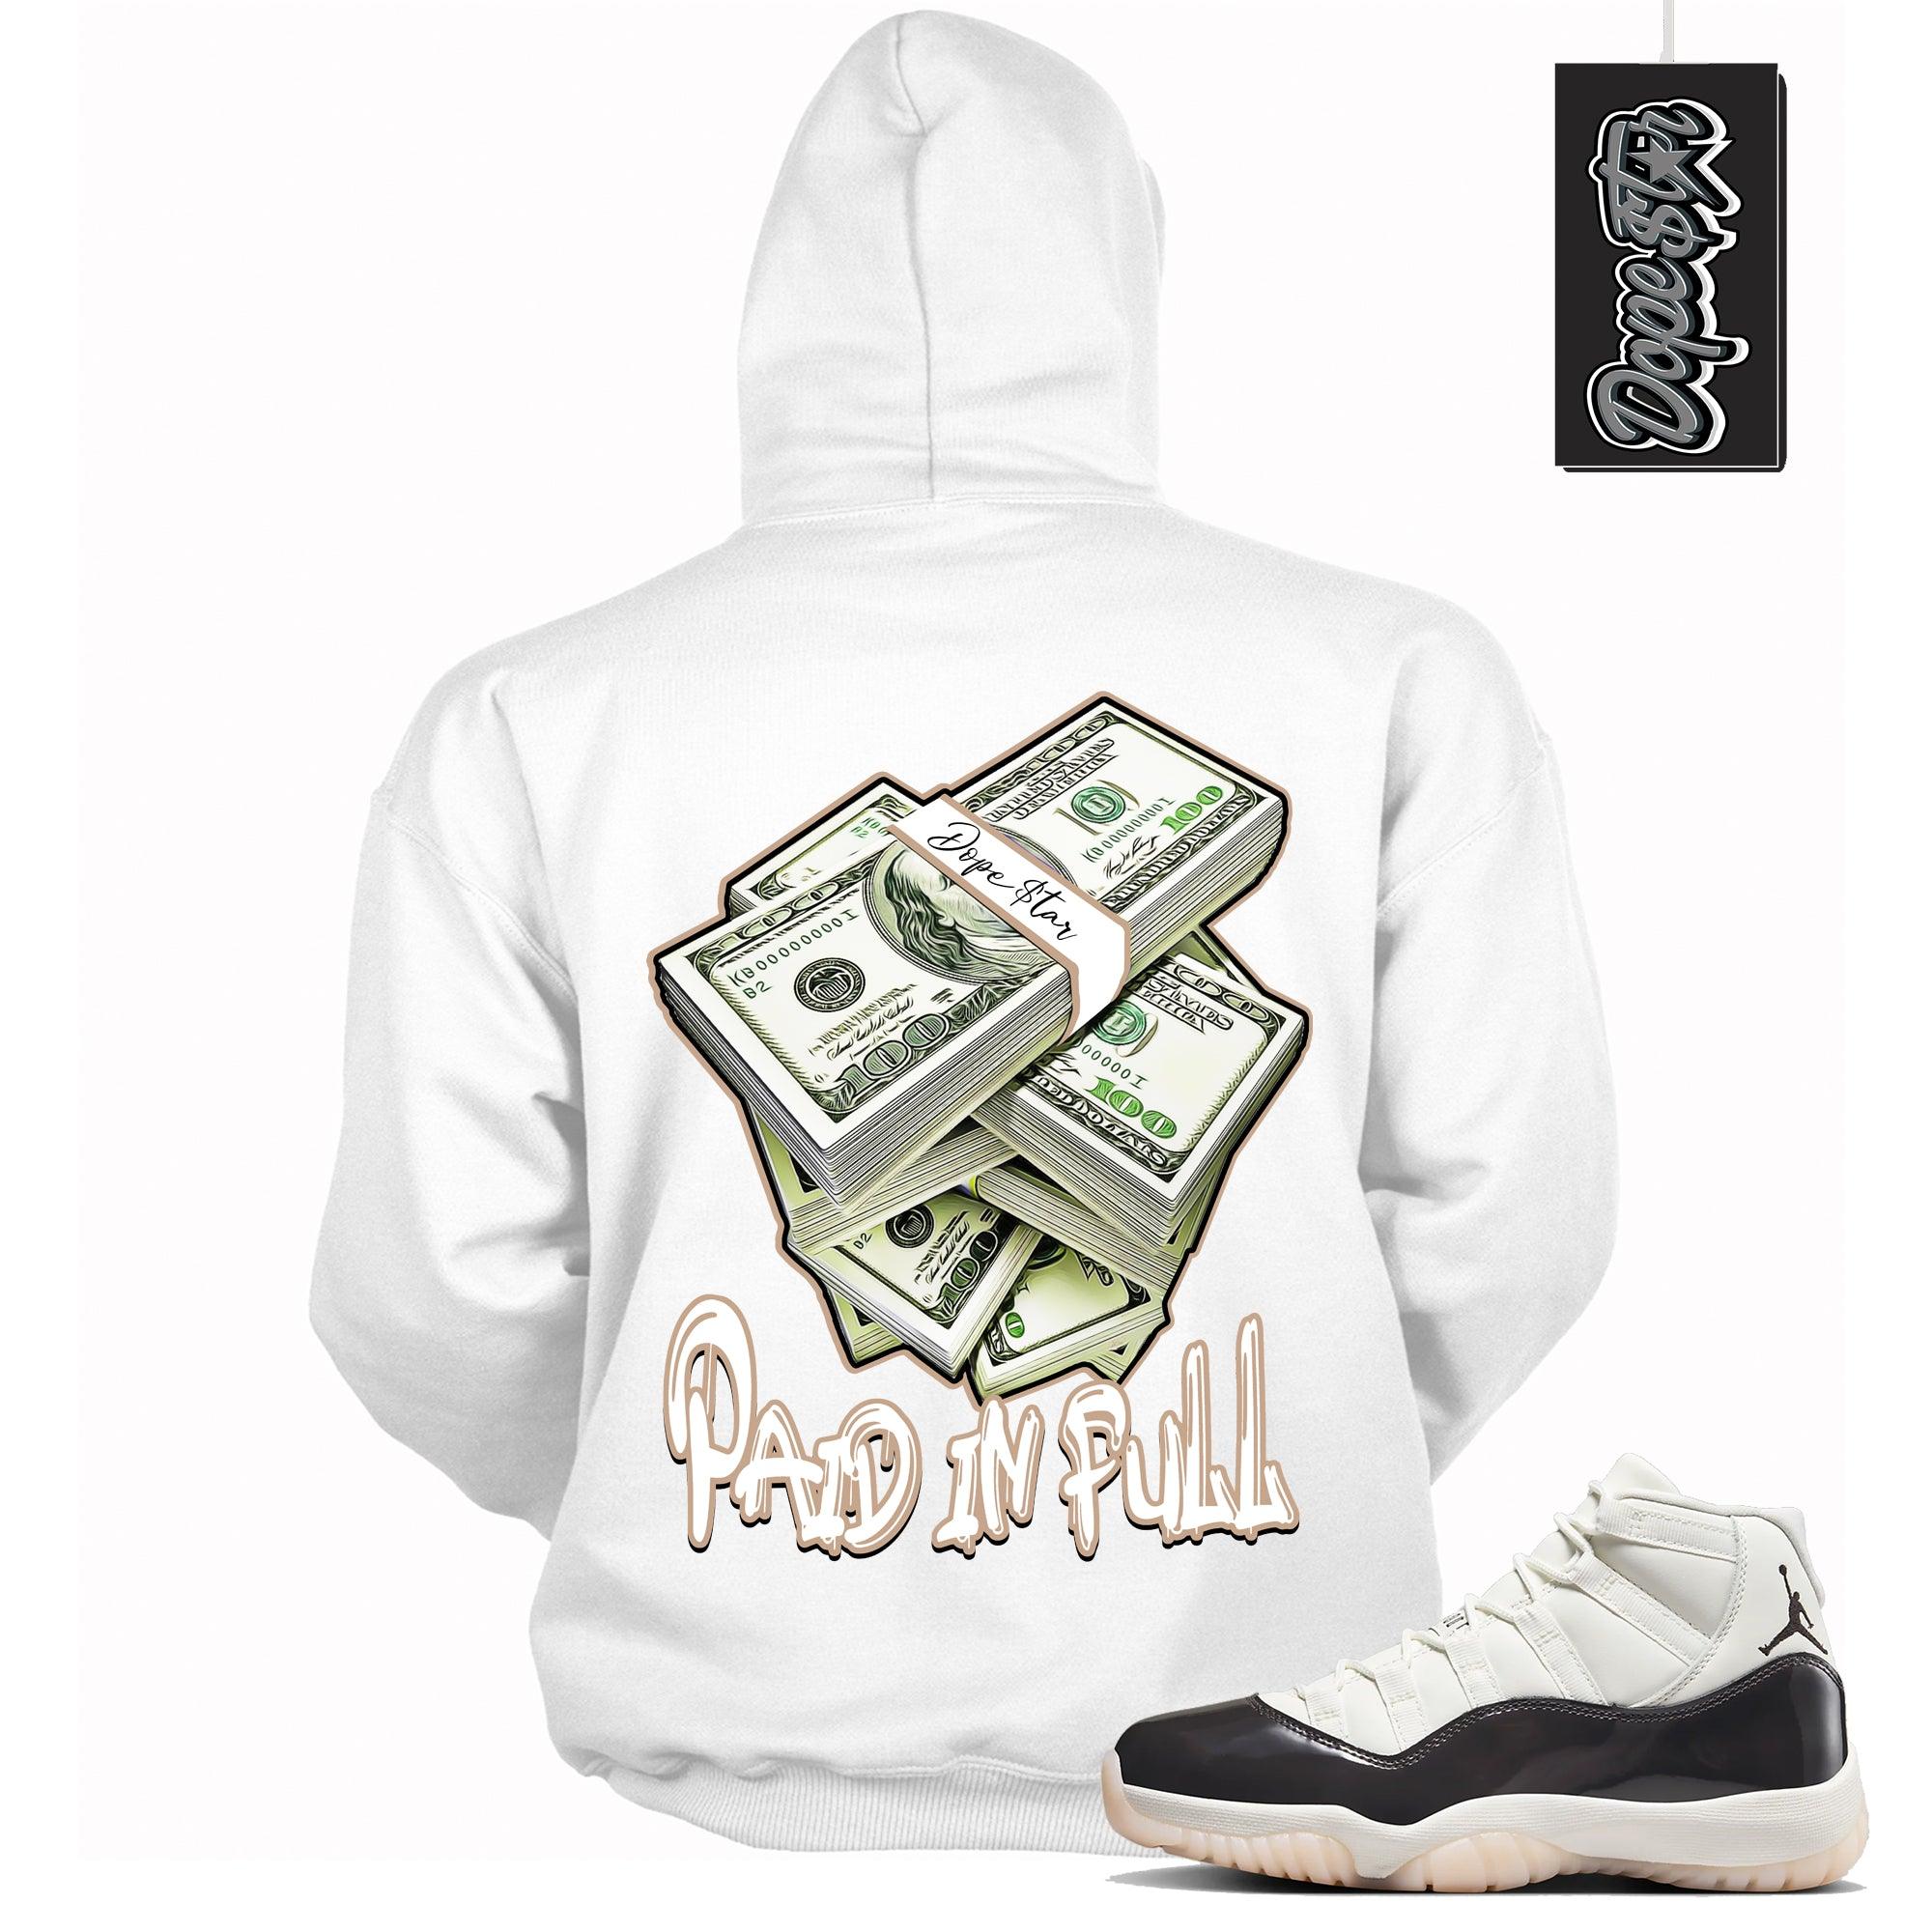 Cool White Graphic Hoodie with “ Paid In Full “ print, that perfectly matches Air Jordan 11 Neapolitan sneakers